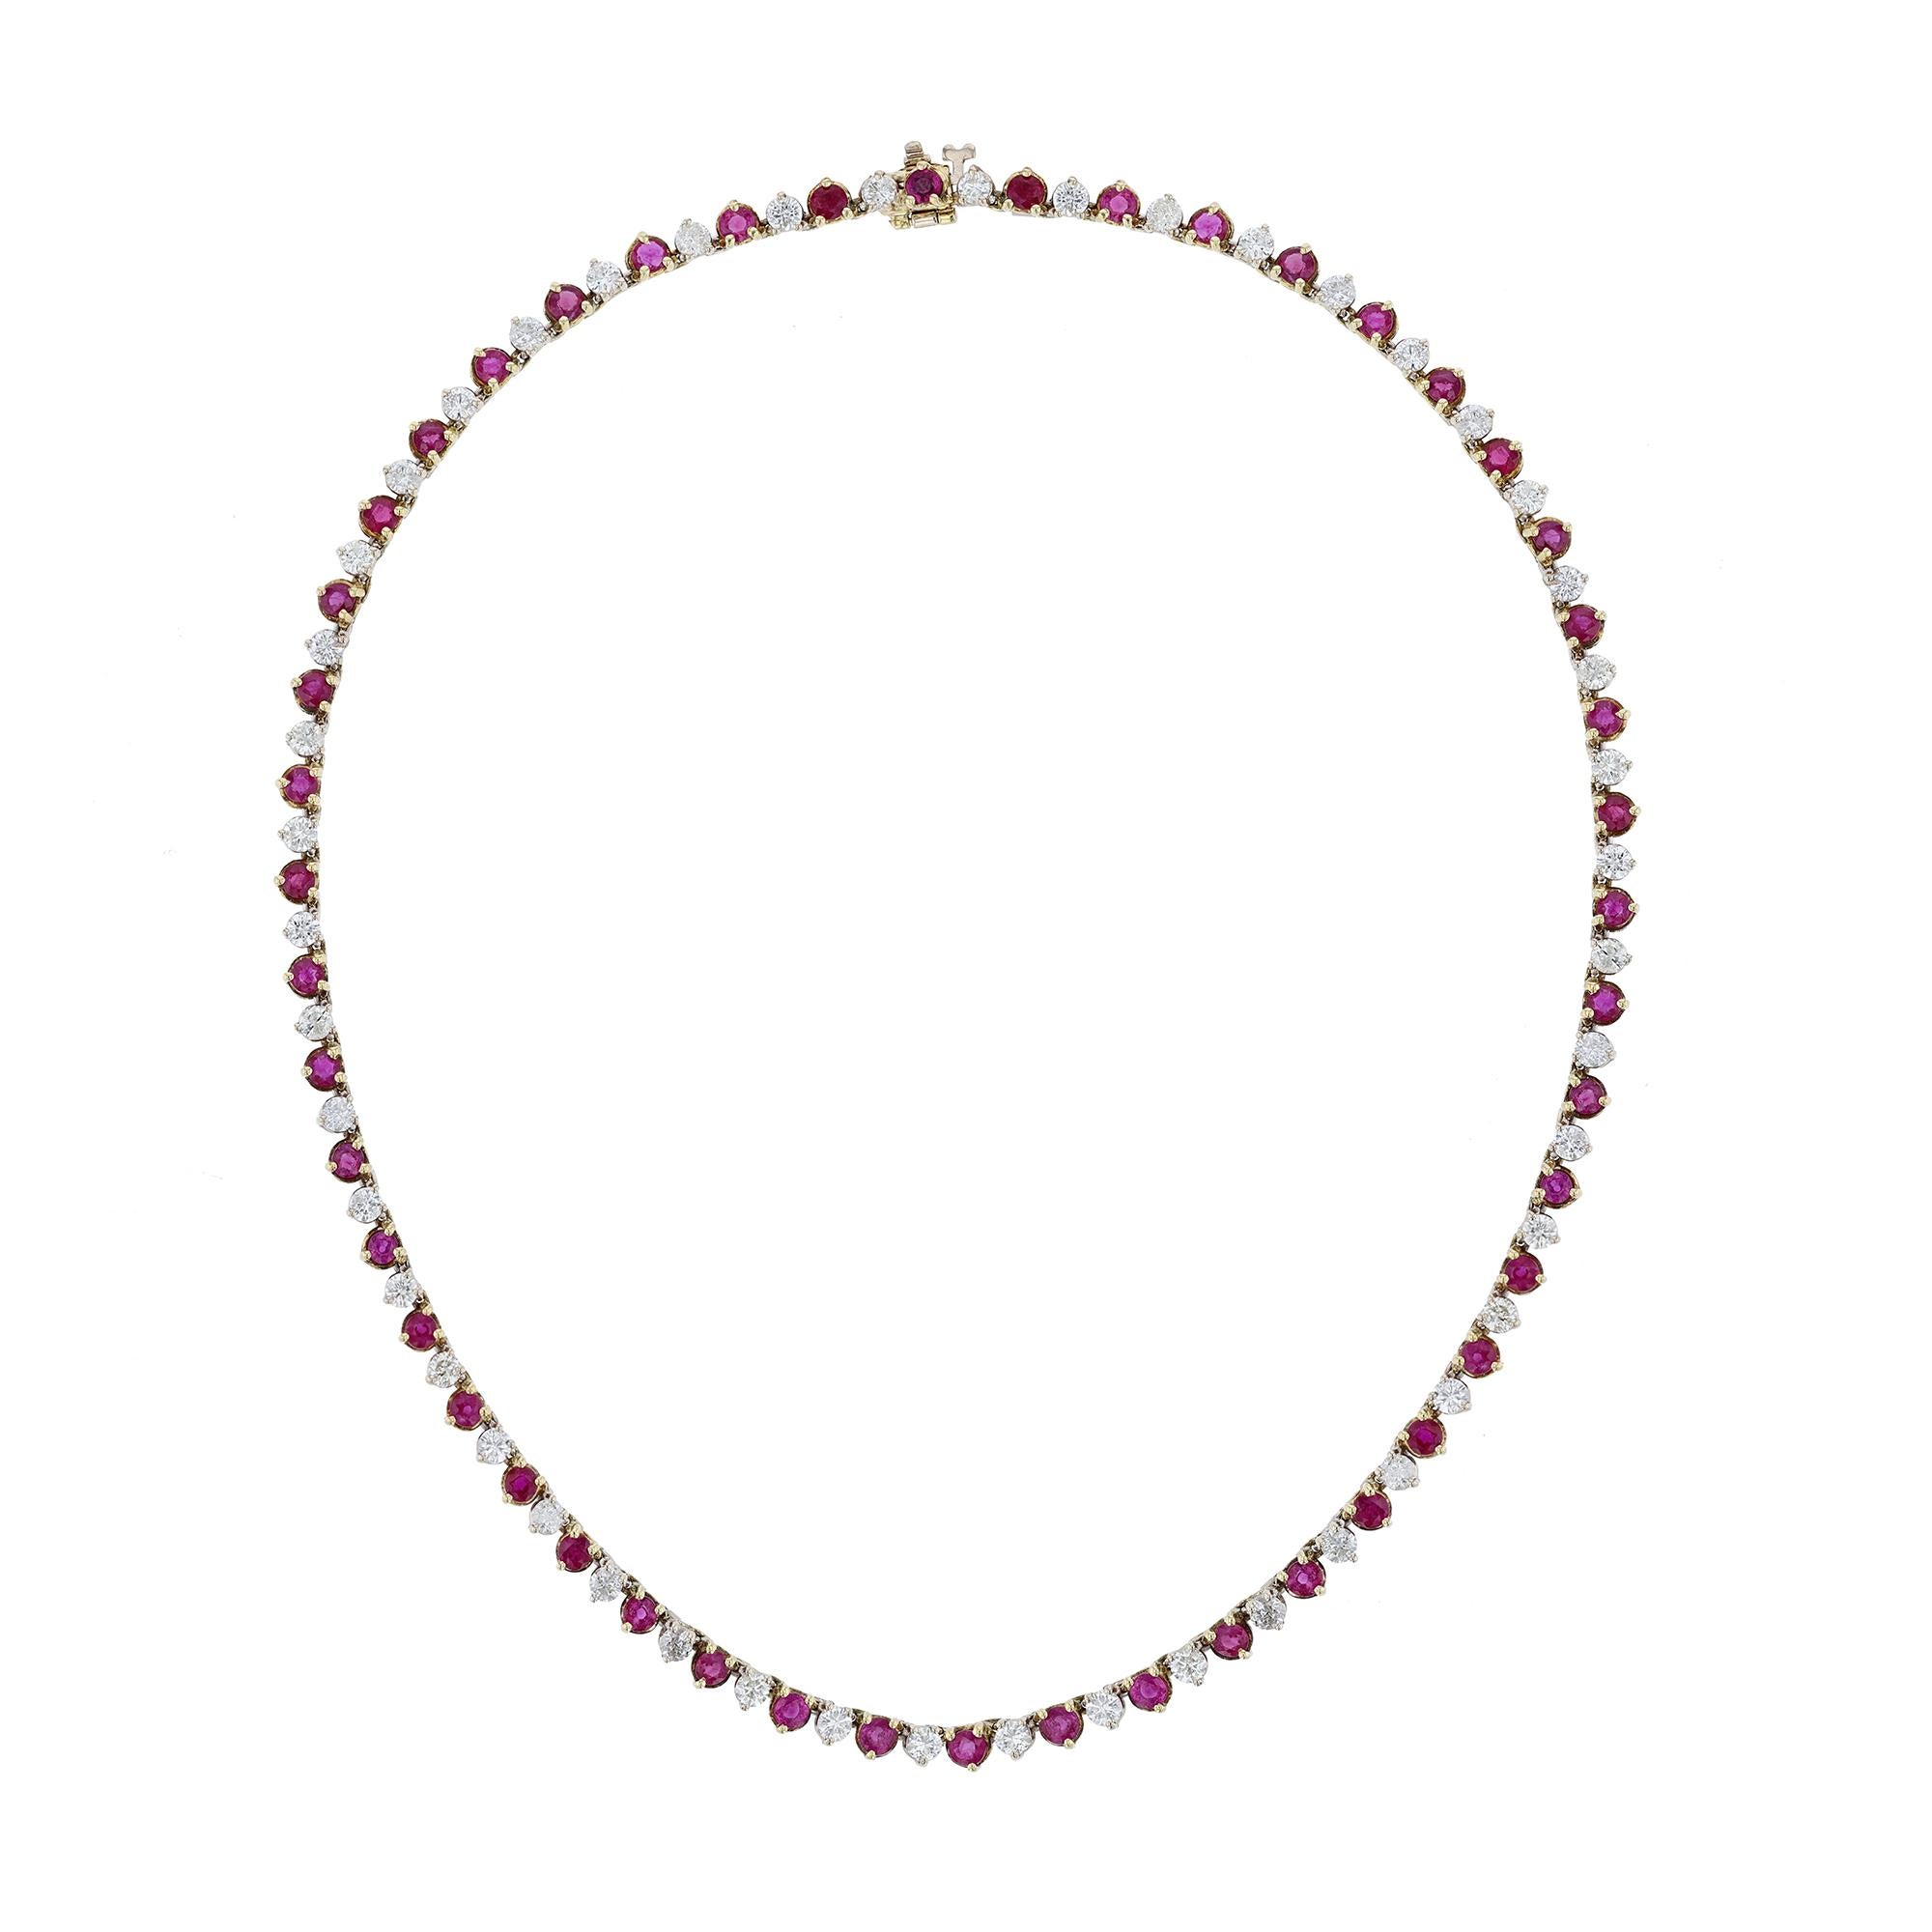 This collar necklace is made in 18K white and yellow gold. It features 50 rubies weighing 9.87 carats. As well as 50 diamonds 5.80 carats. Necklace has a color grade (H). and clarity grade (SI2). All stones are prong set.

